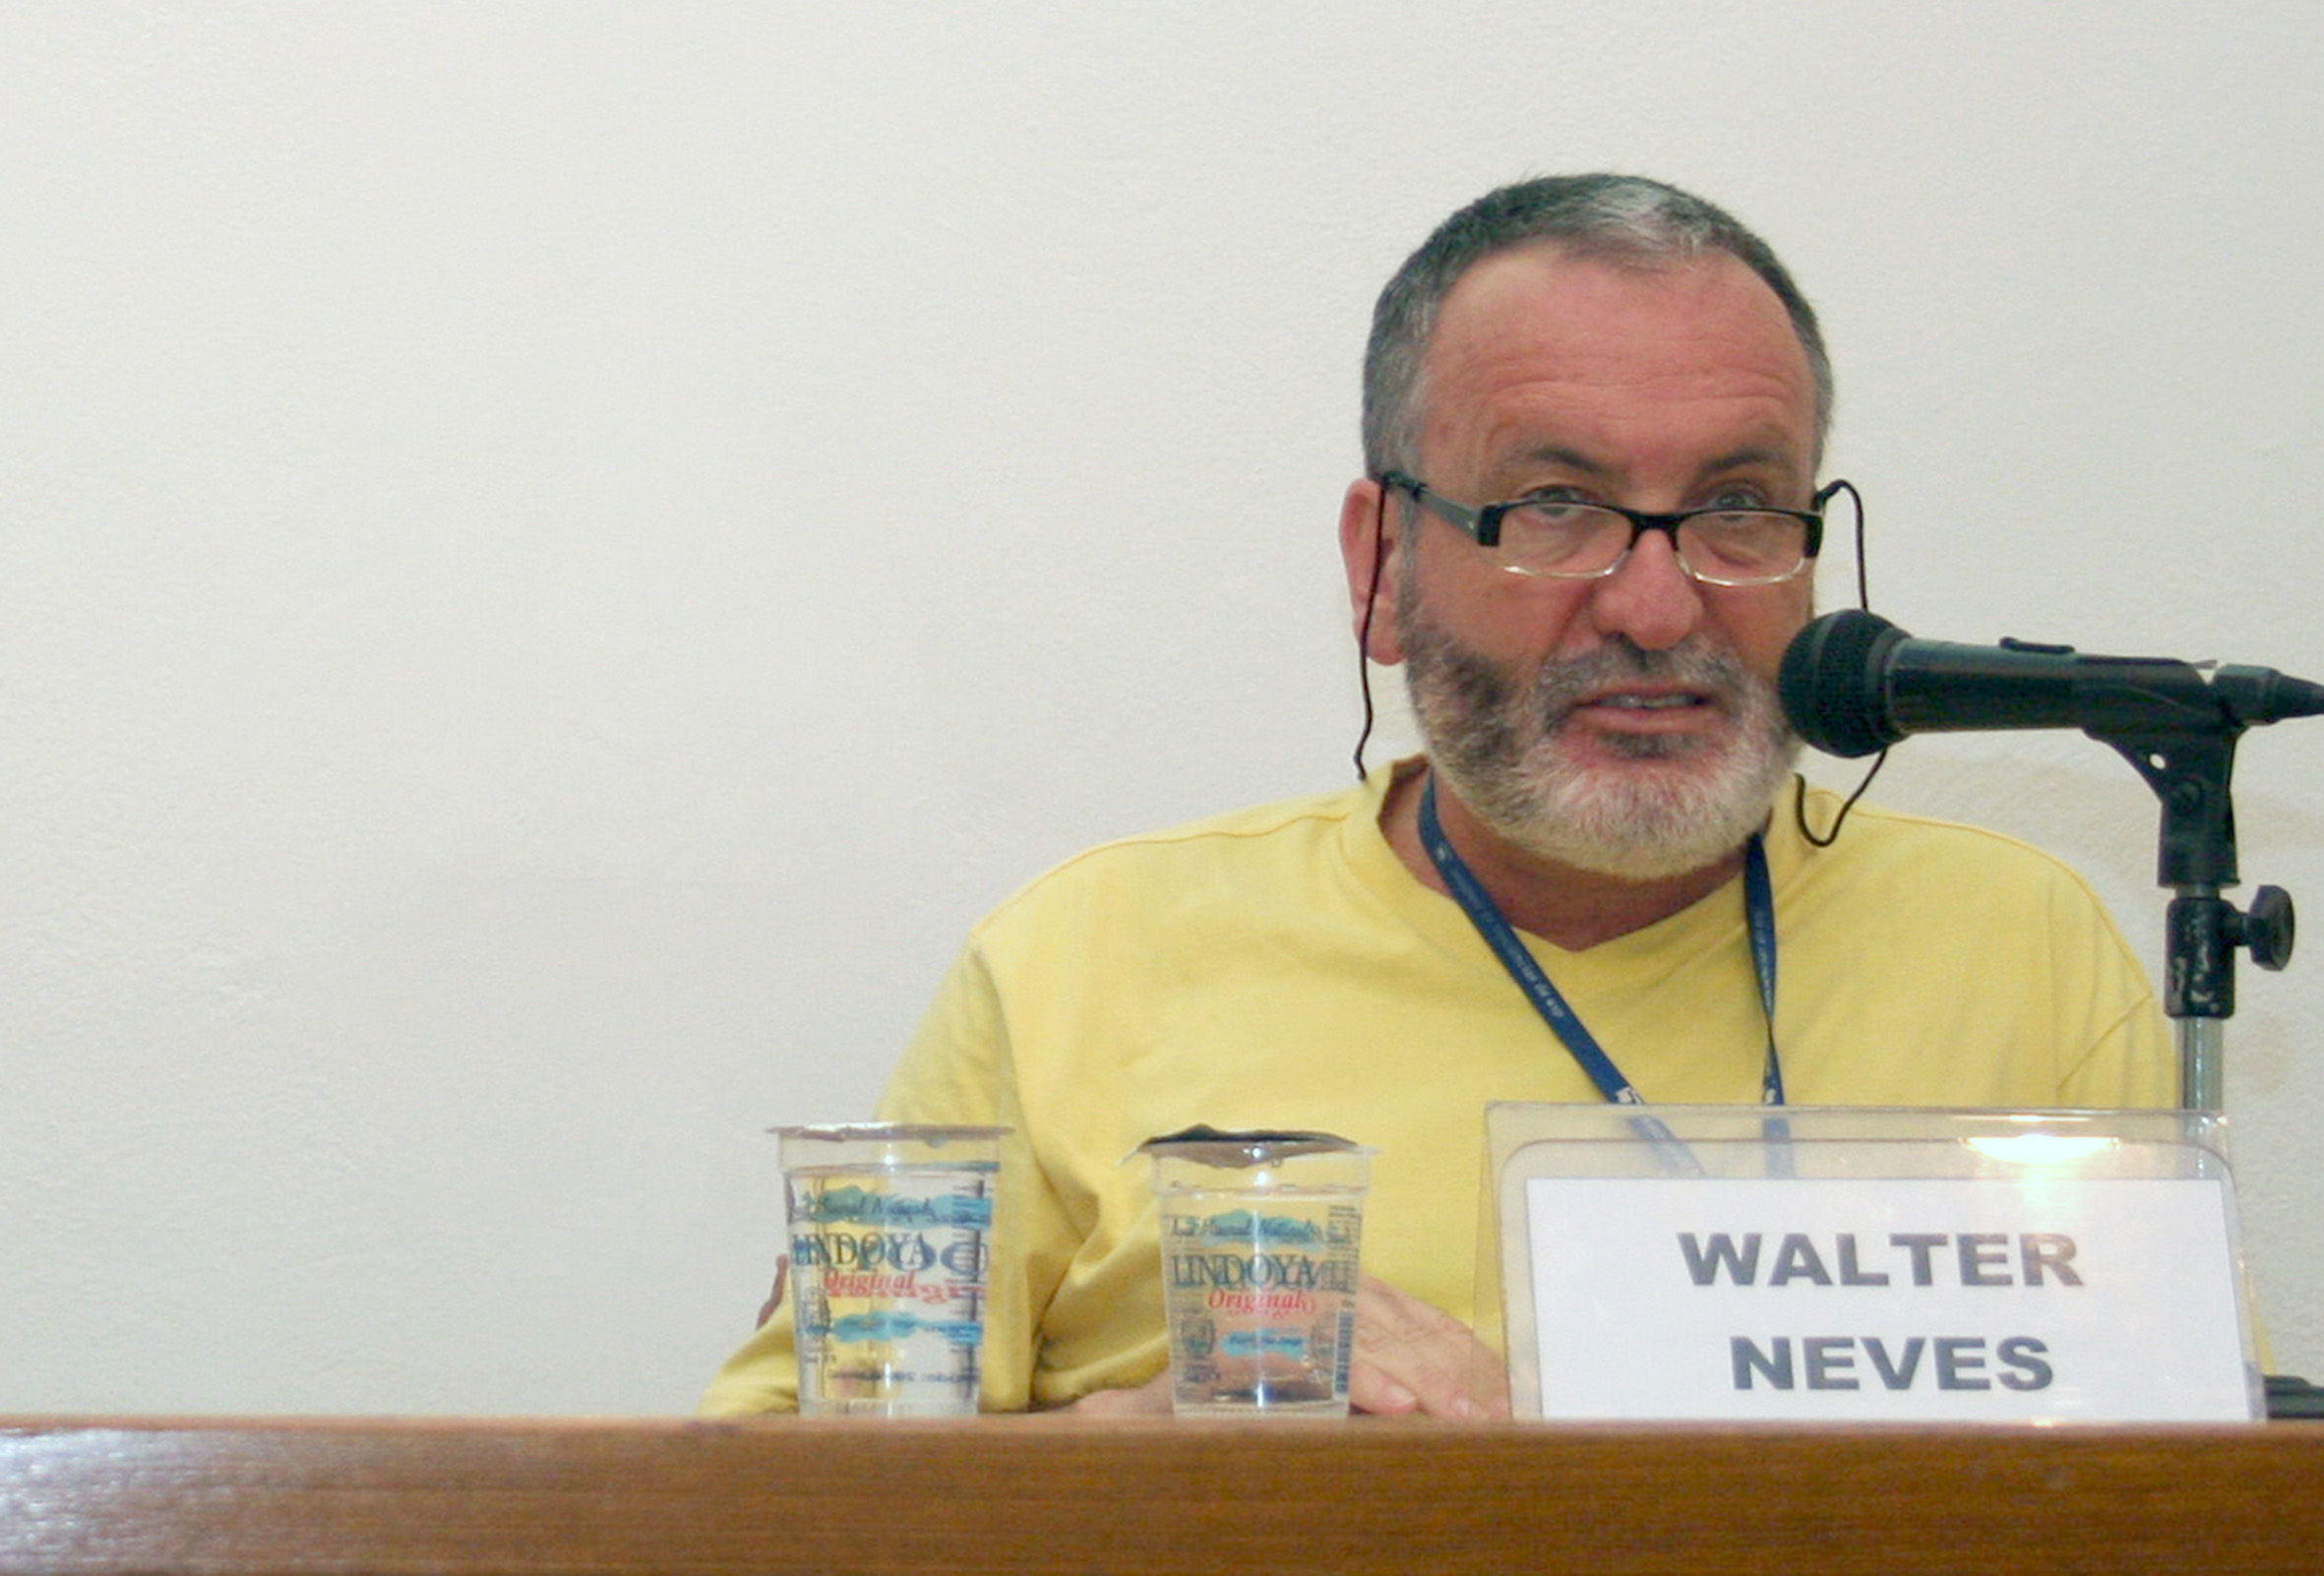 Walter Neves